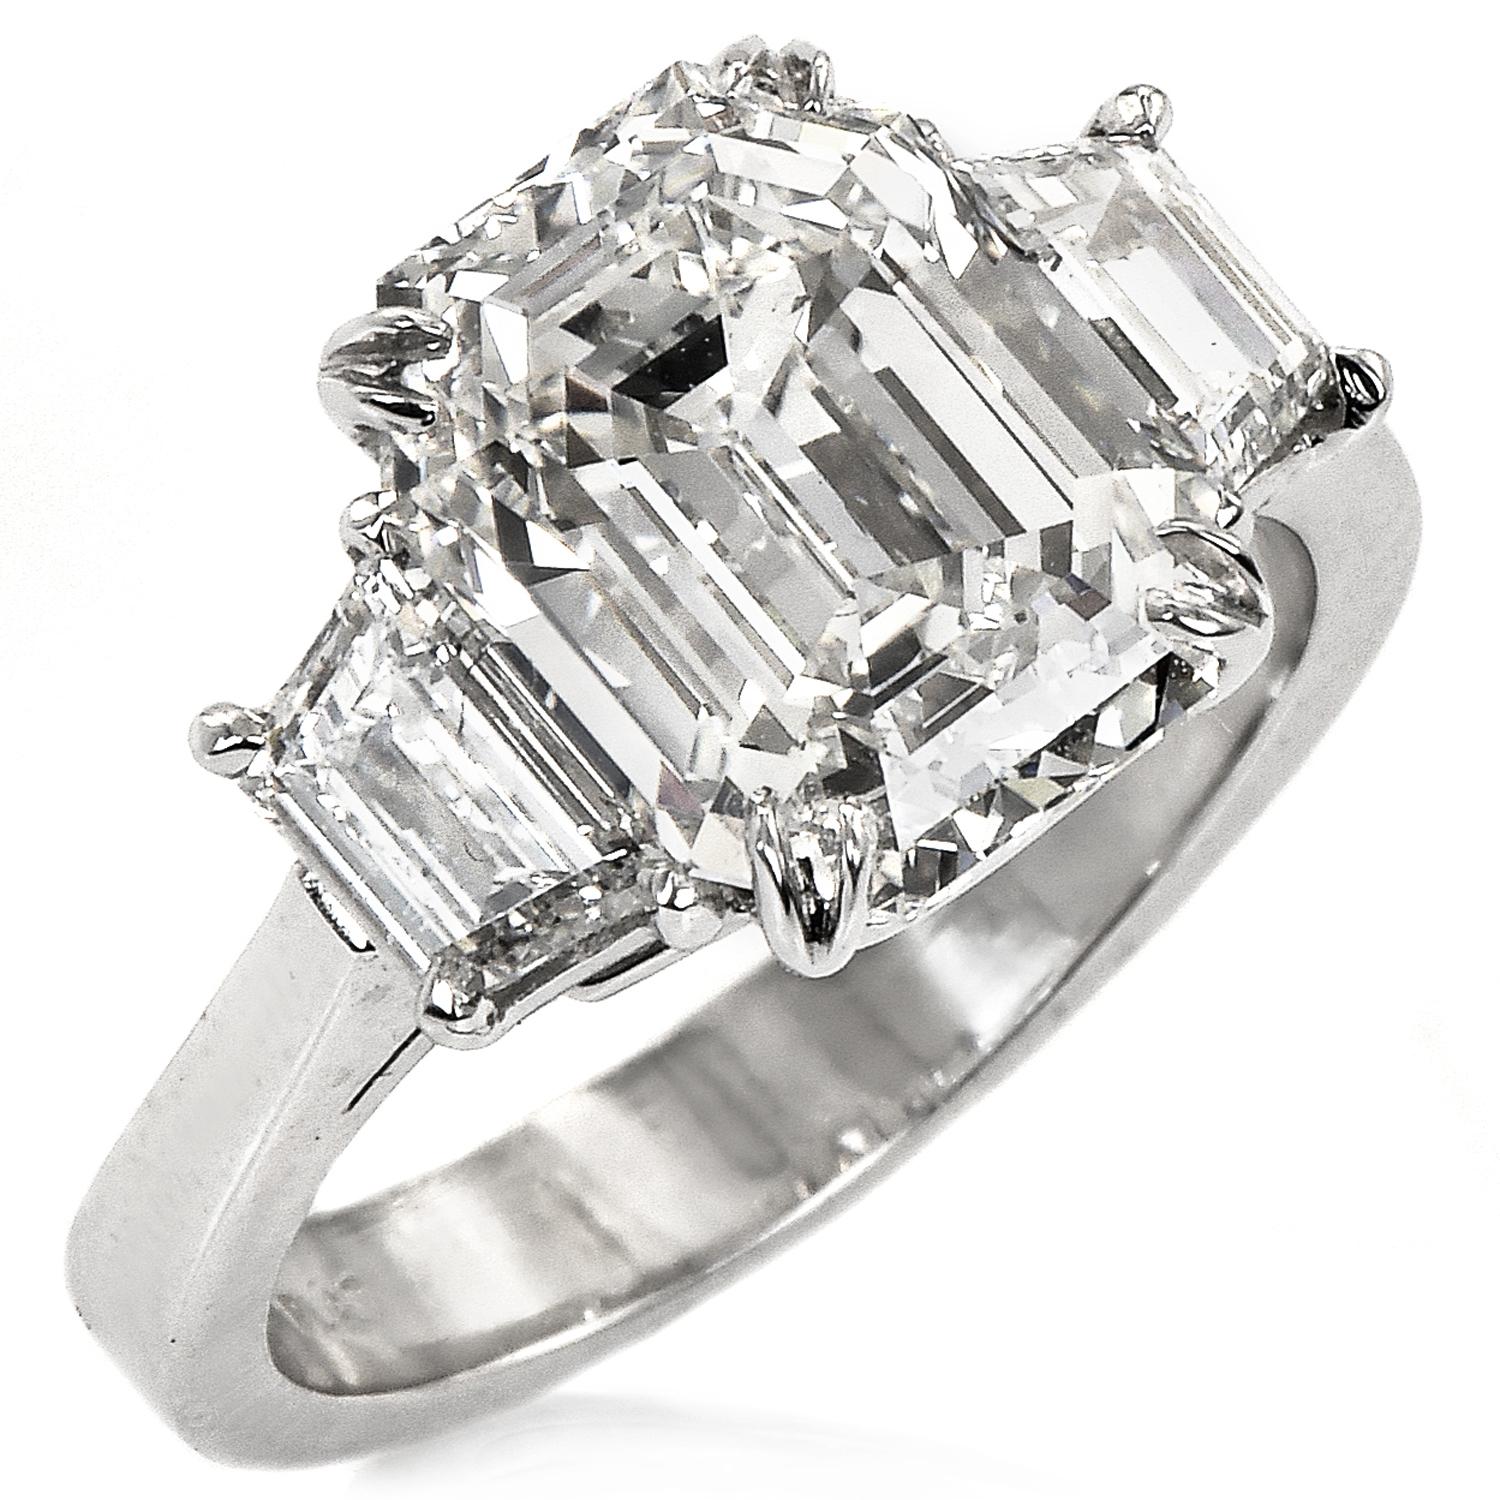 GIA 5.47cts Emerald-cut  Diamond I-VVS2 Engagement Three stone Ring For Sale